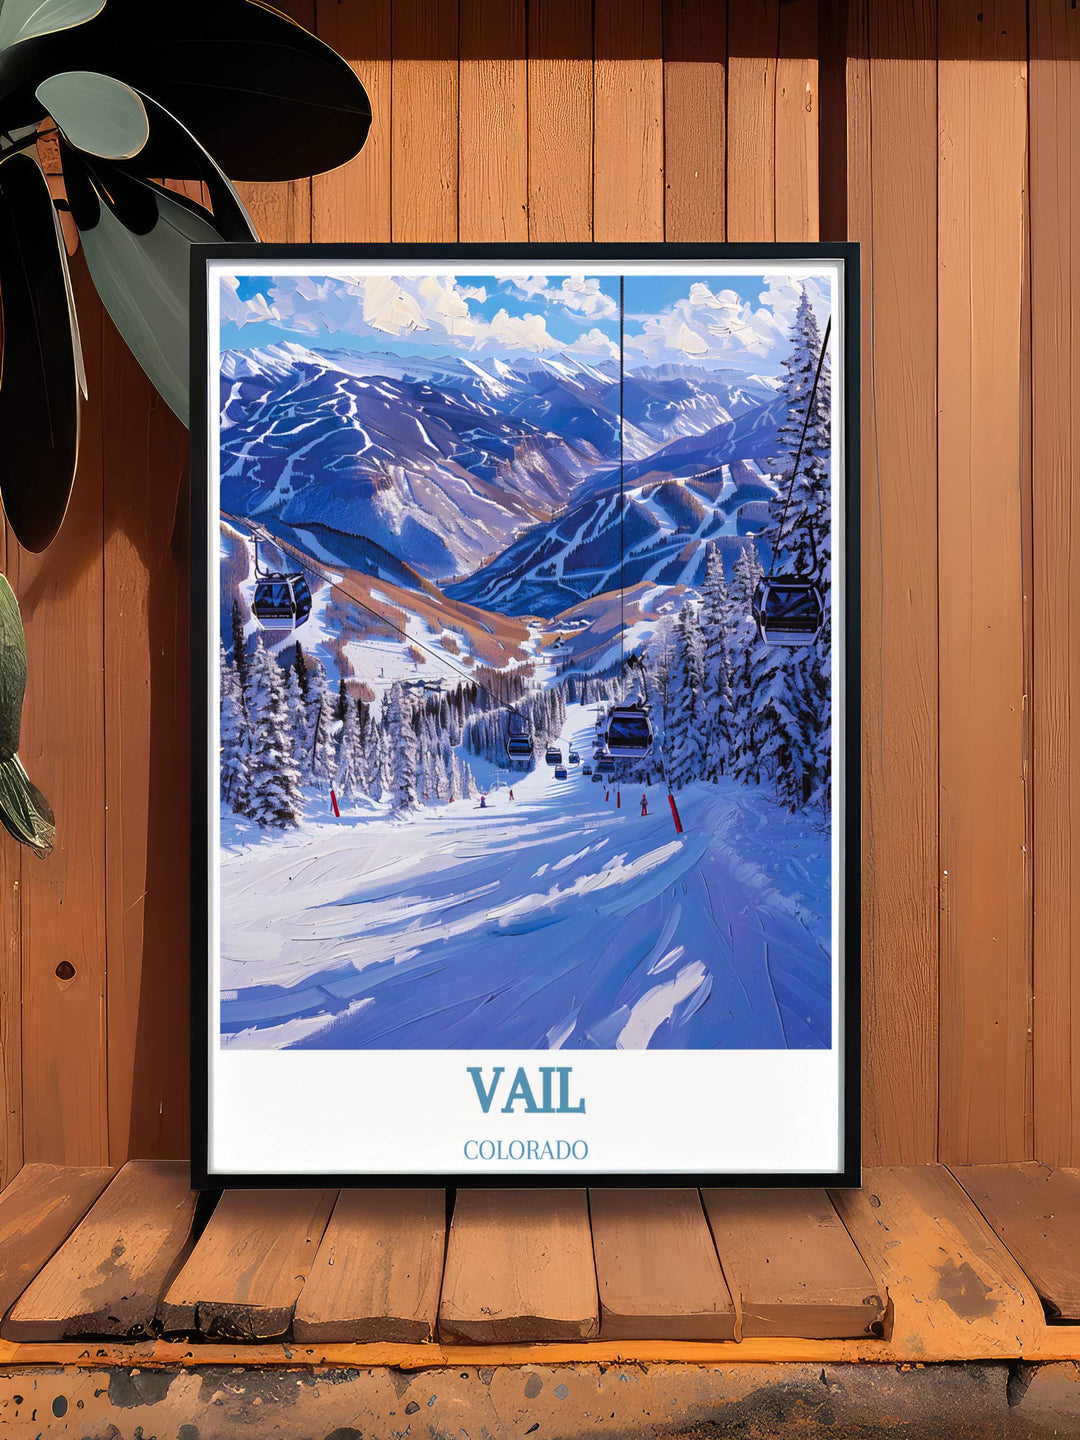 Vintage Vail Ski Resort print with a retro inspired design, celebrating the history and tradition of skiing in Colorado. Adds a touch of nostalgia and elegance to any space.